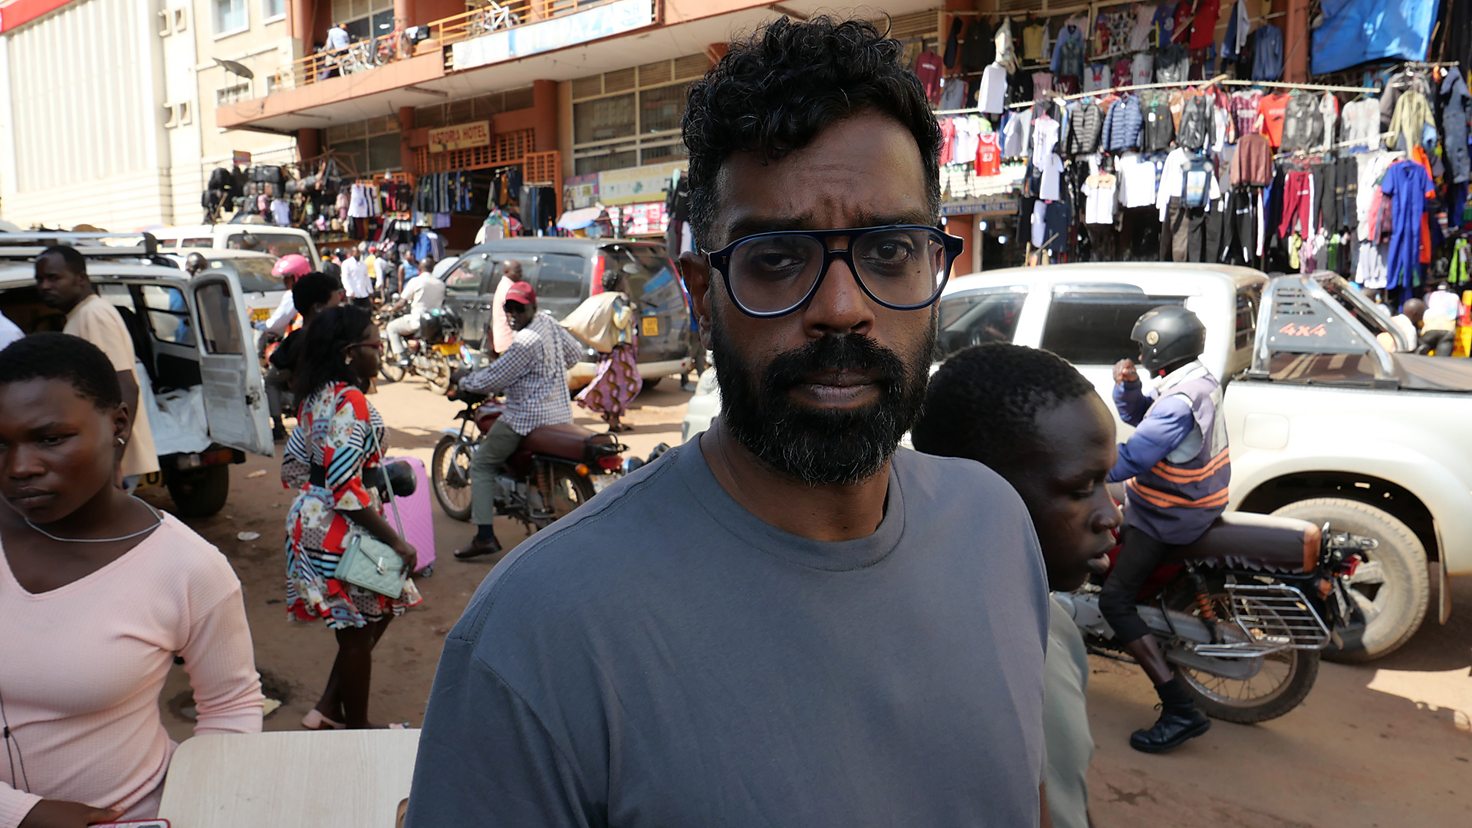 First-look: Romesh Ranganathan Returns To BBC Two and iPlayer For A Final Series Of Misadventures